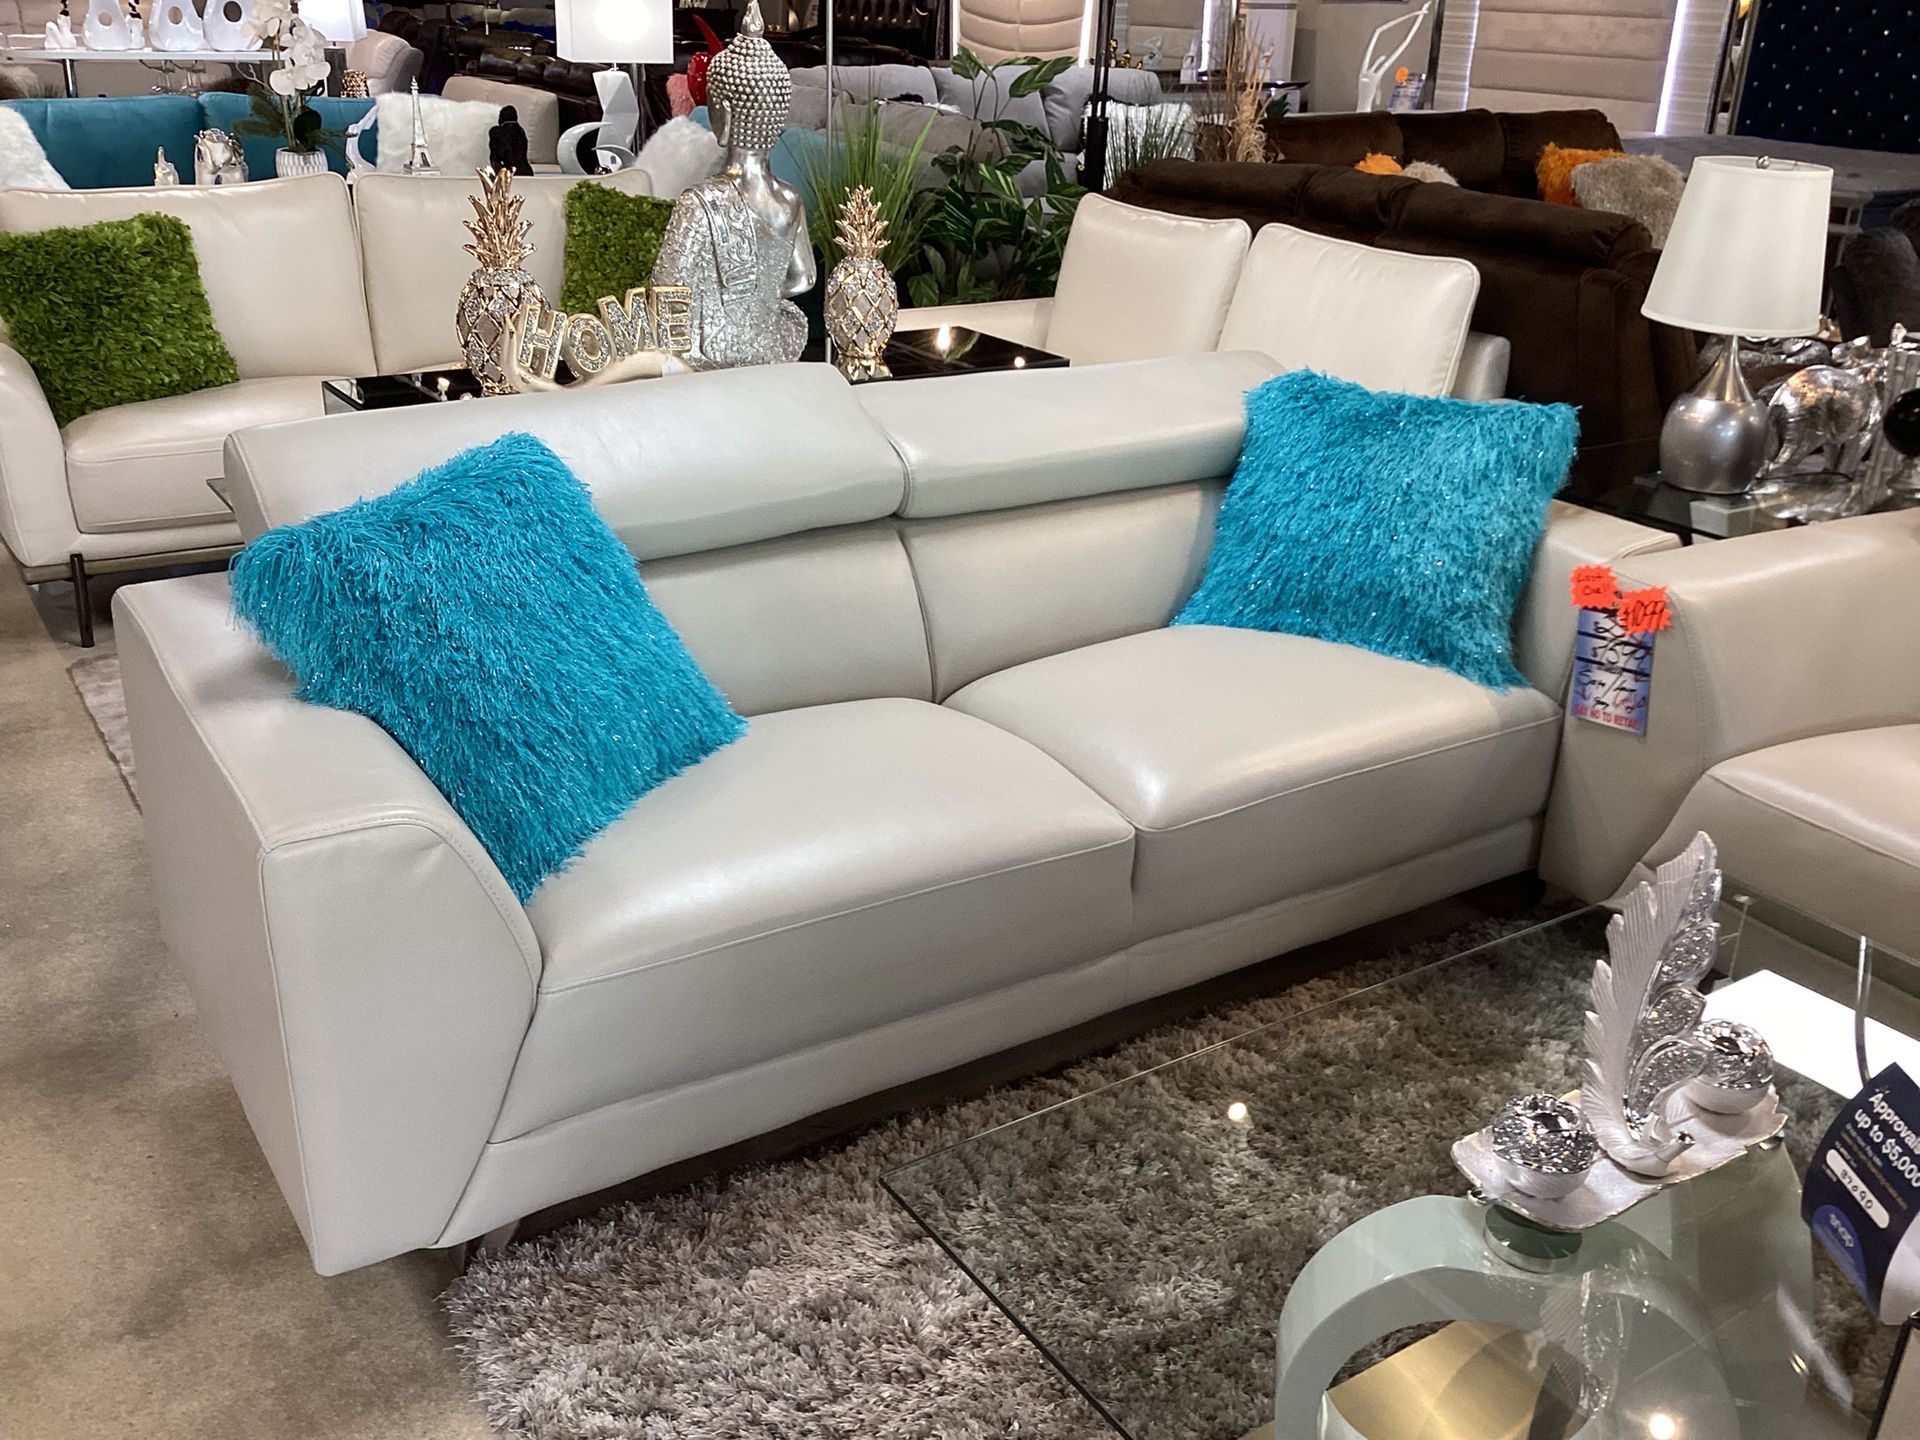 Beautiful Furniture Sofa And Loveseat On Sale Now For $799 Color White And Gray; Floor Model